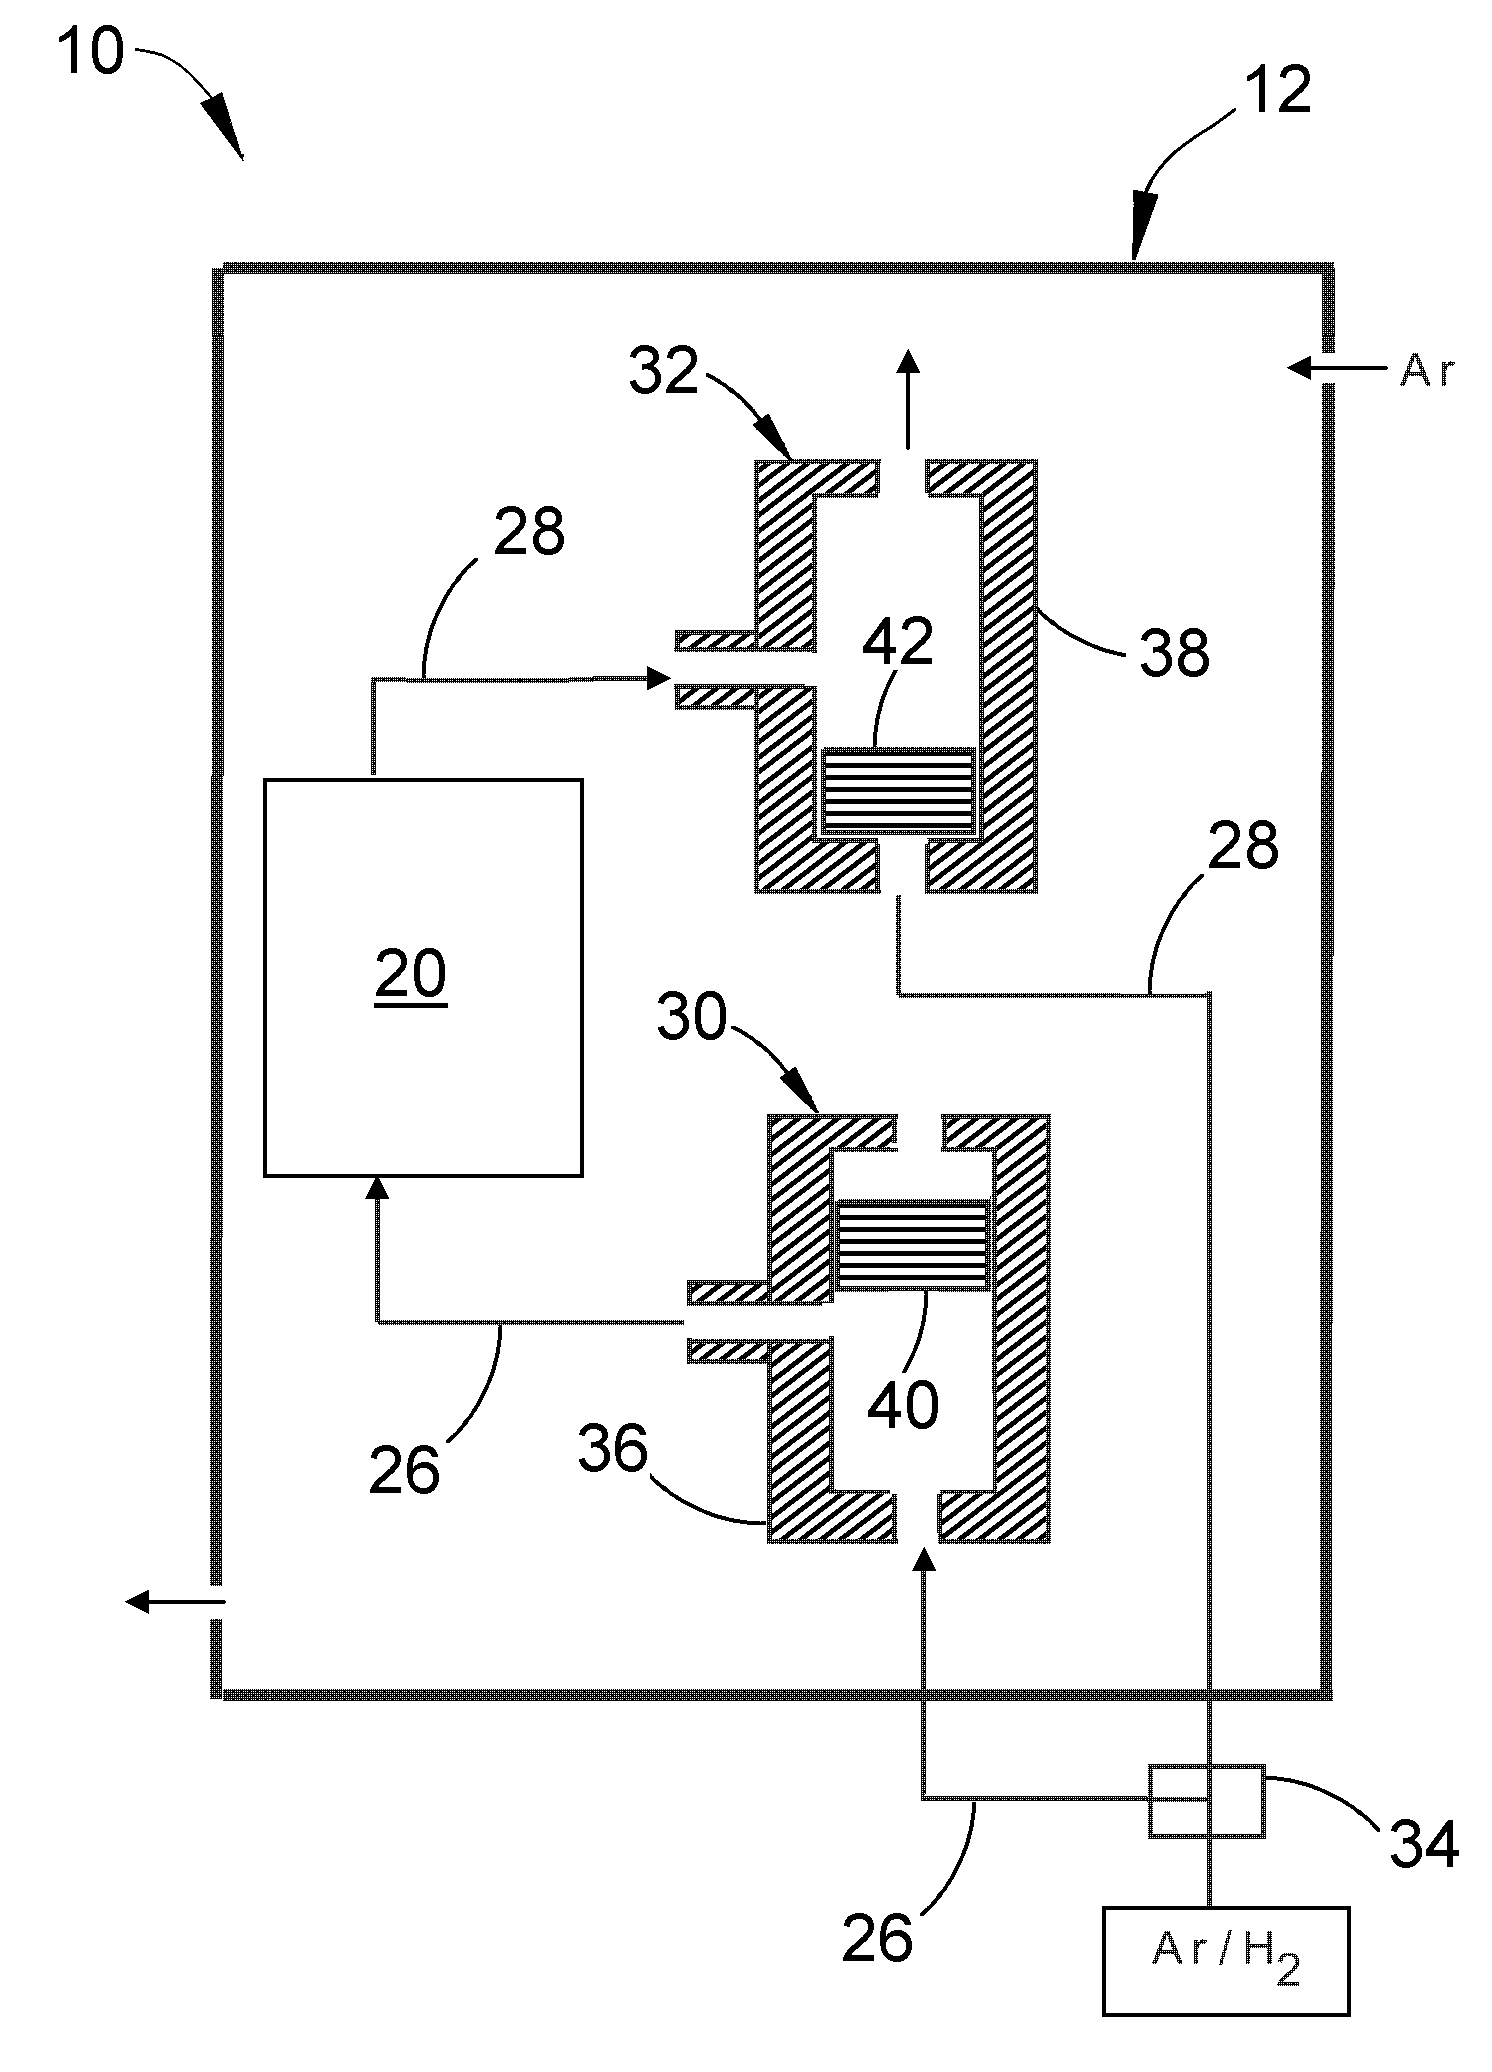 Method and apparatus for controlling diffusion coating of internal passages